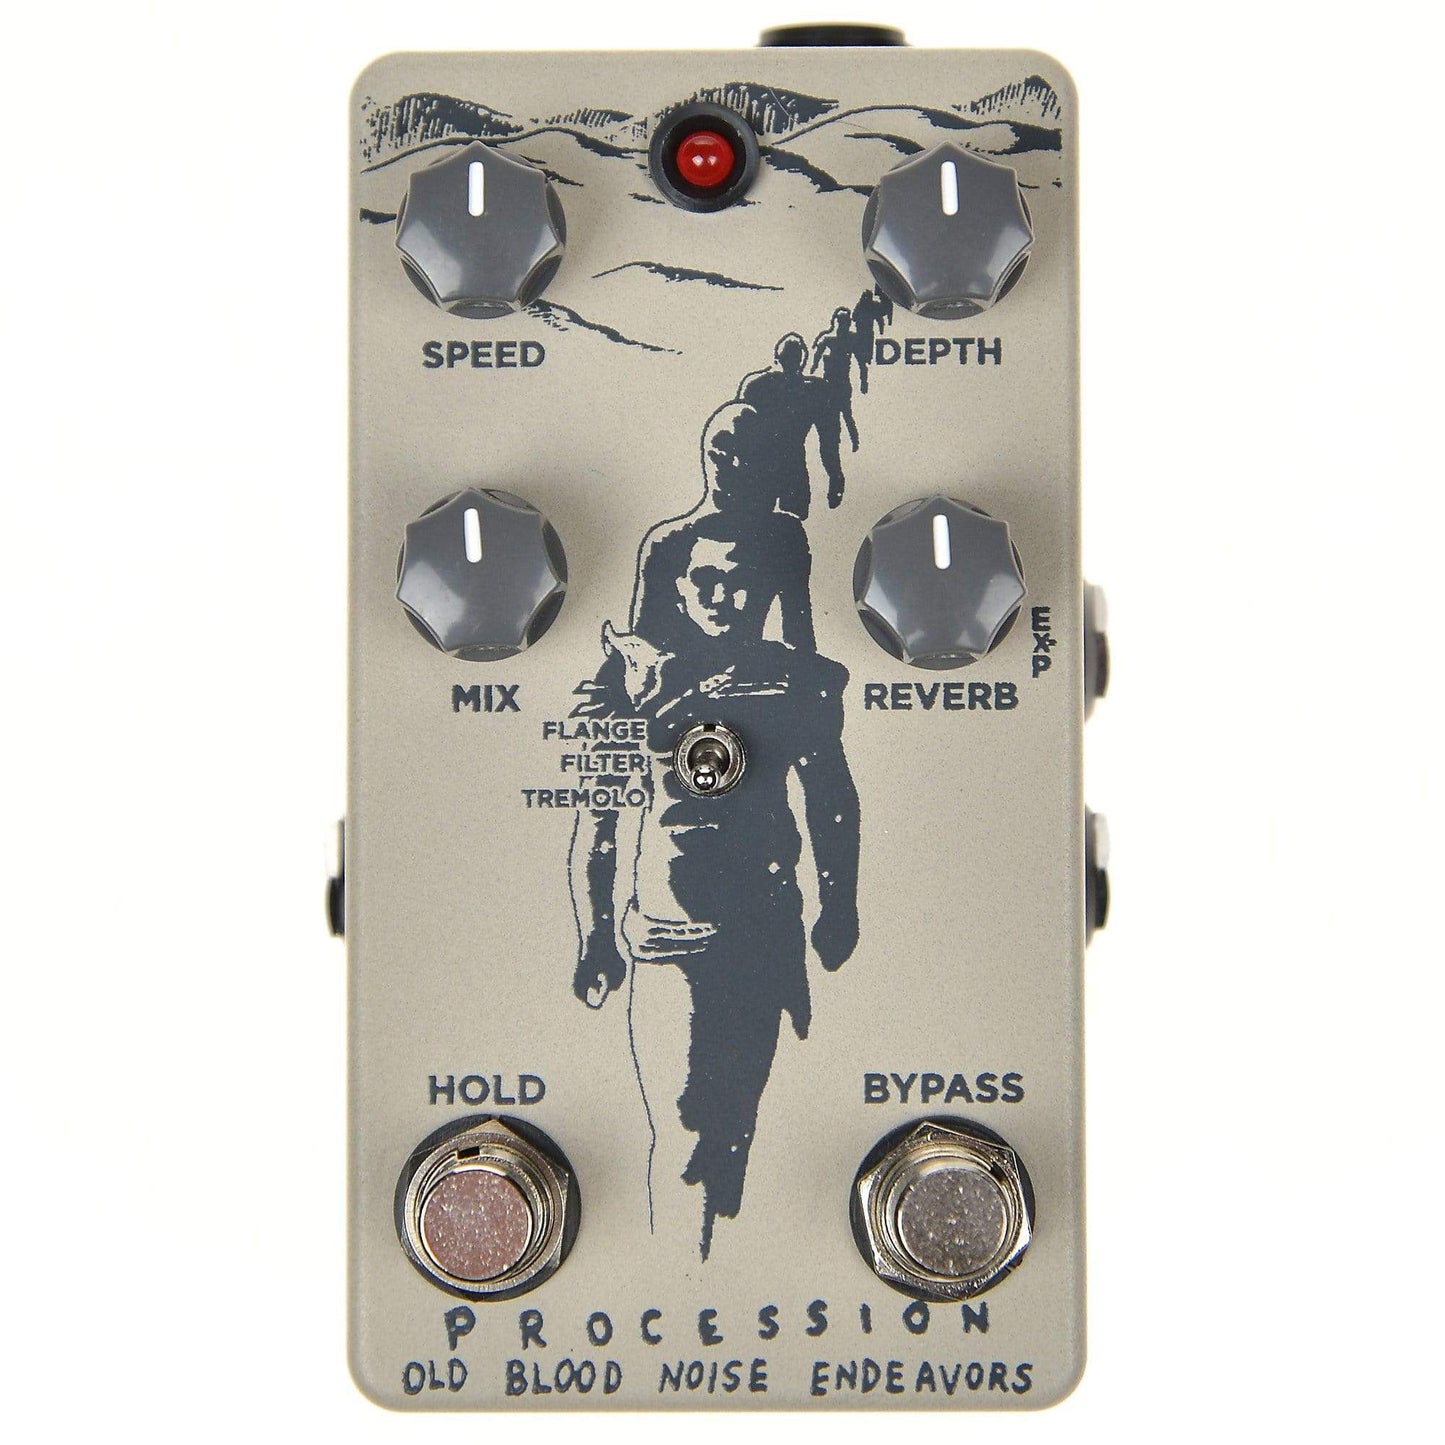 Old Blood Noise Endeavors Procession Reverb V2 Effects and Pedals / Reverb